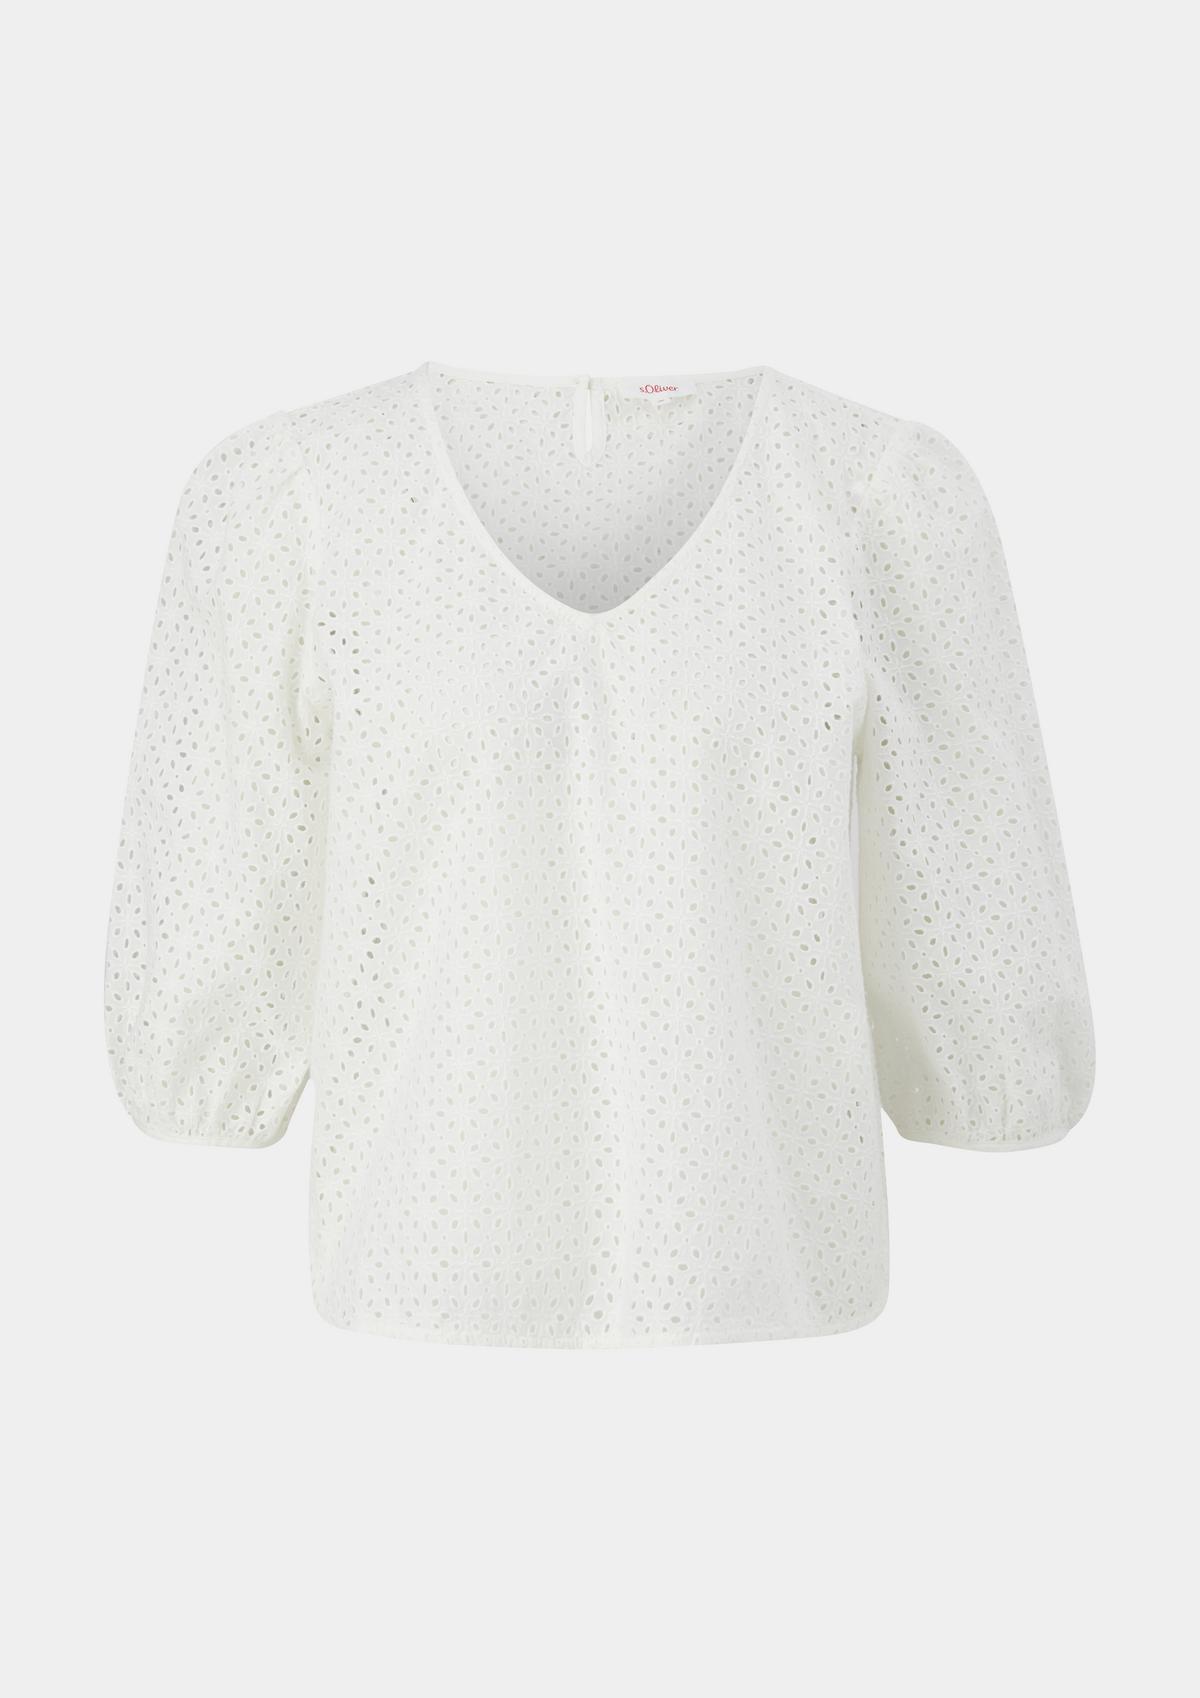 s.Oliver Blouse van broderie anglaise